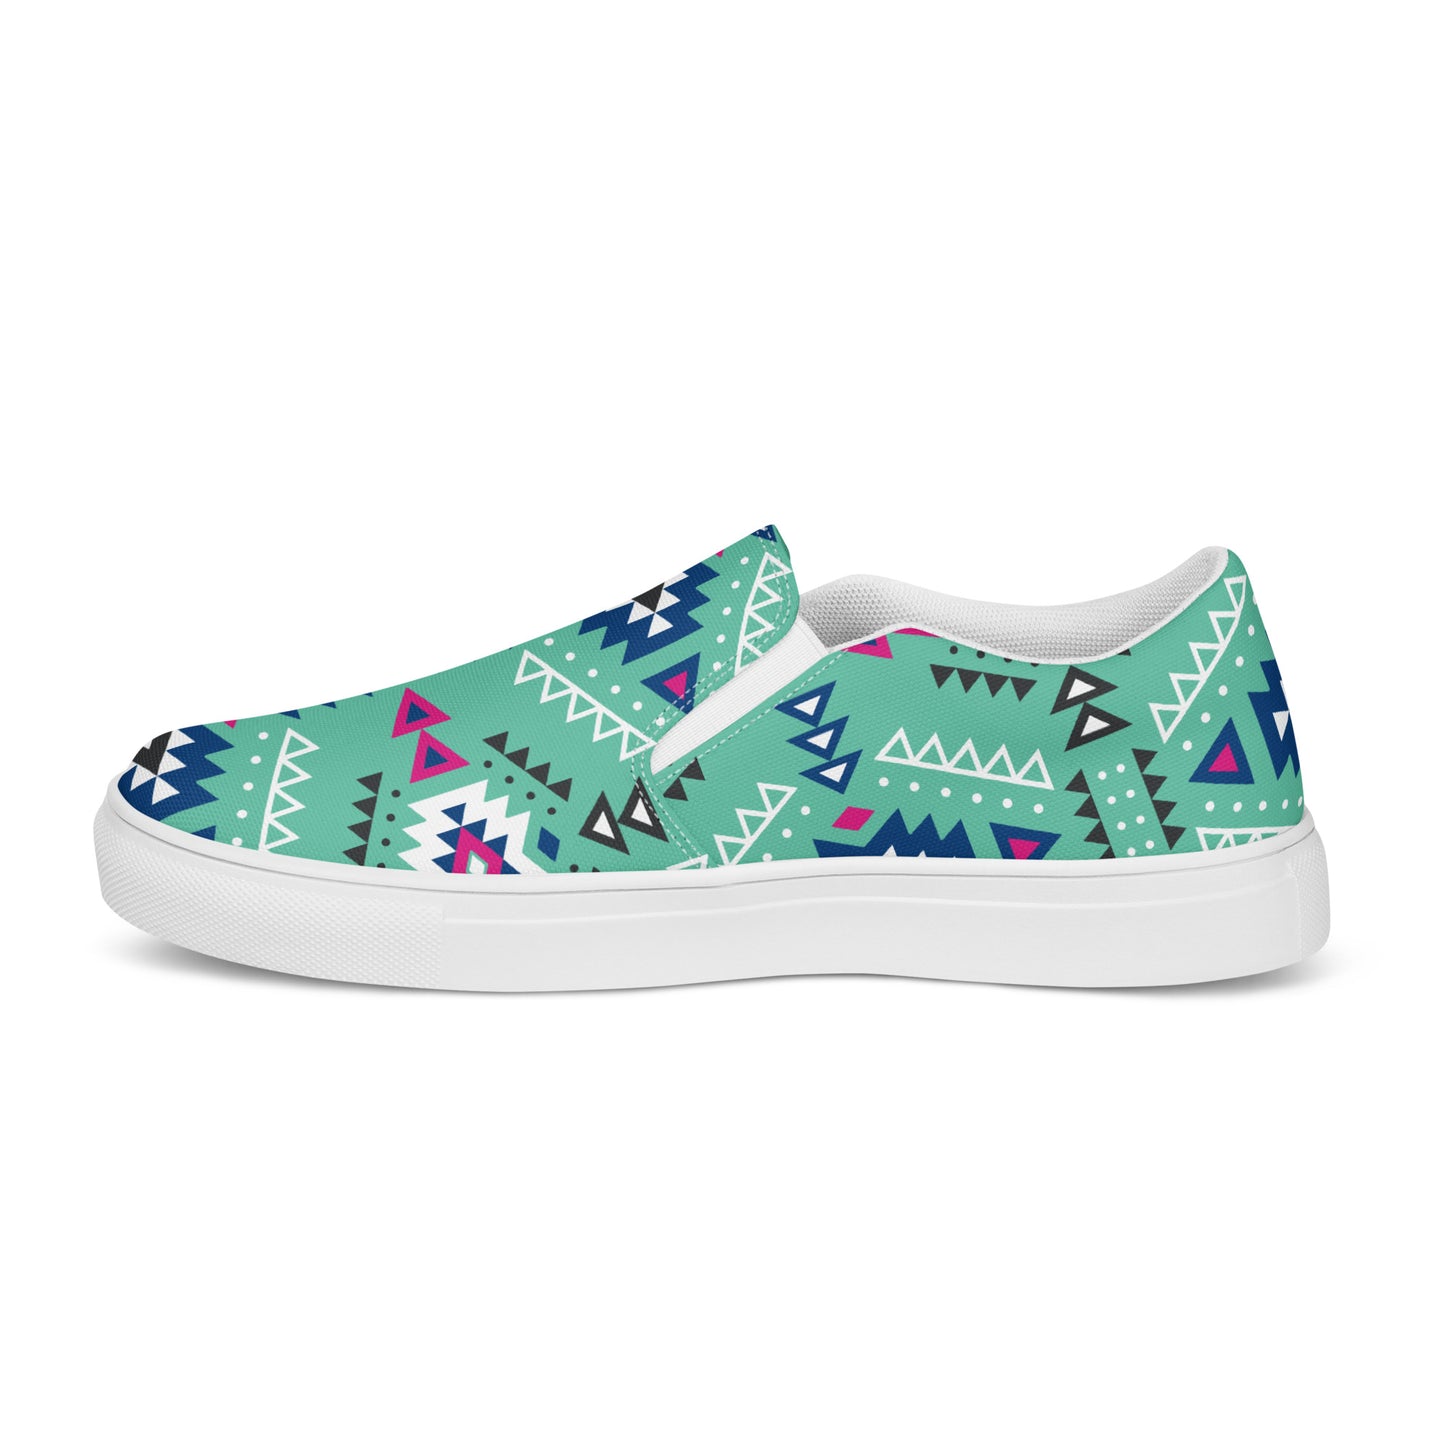 Aztec Turquoise Western Style Women’s slip-on canvas shoes